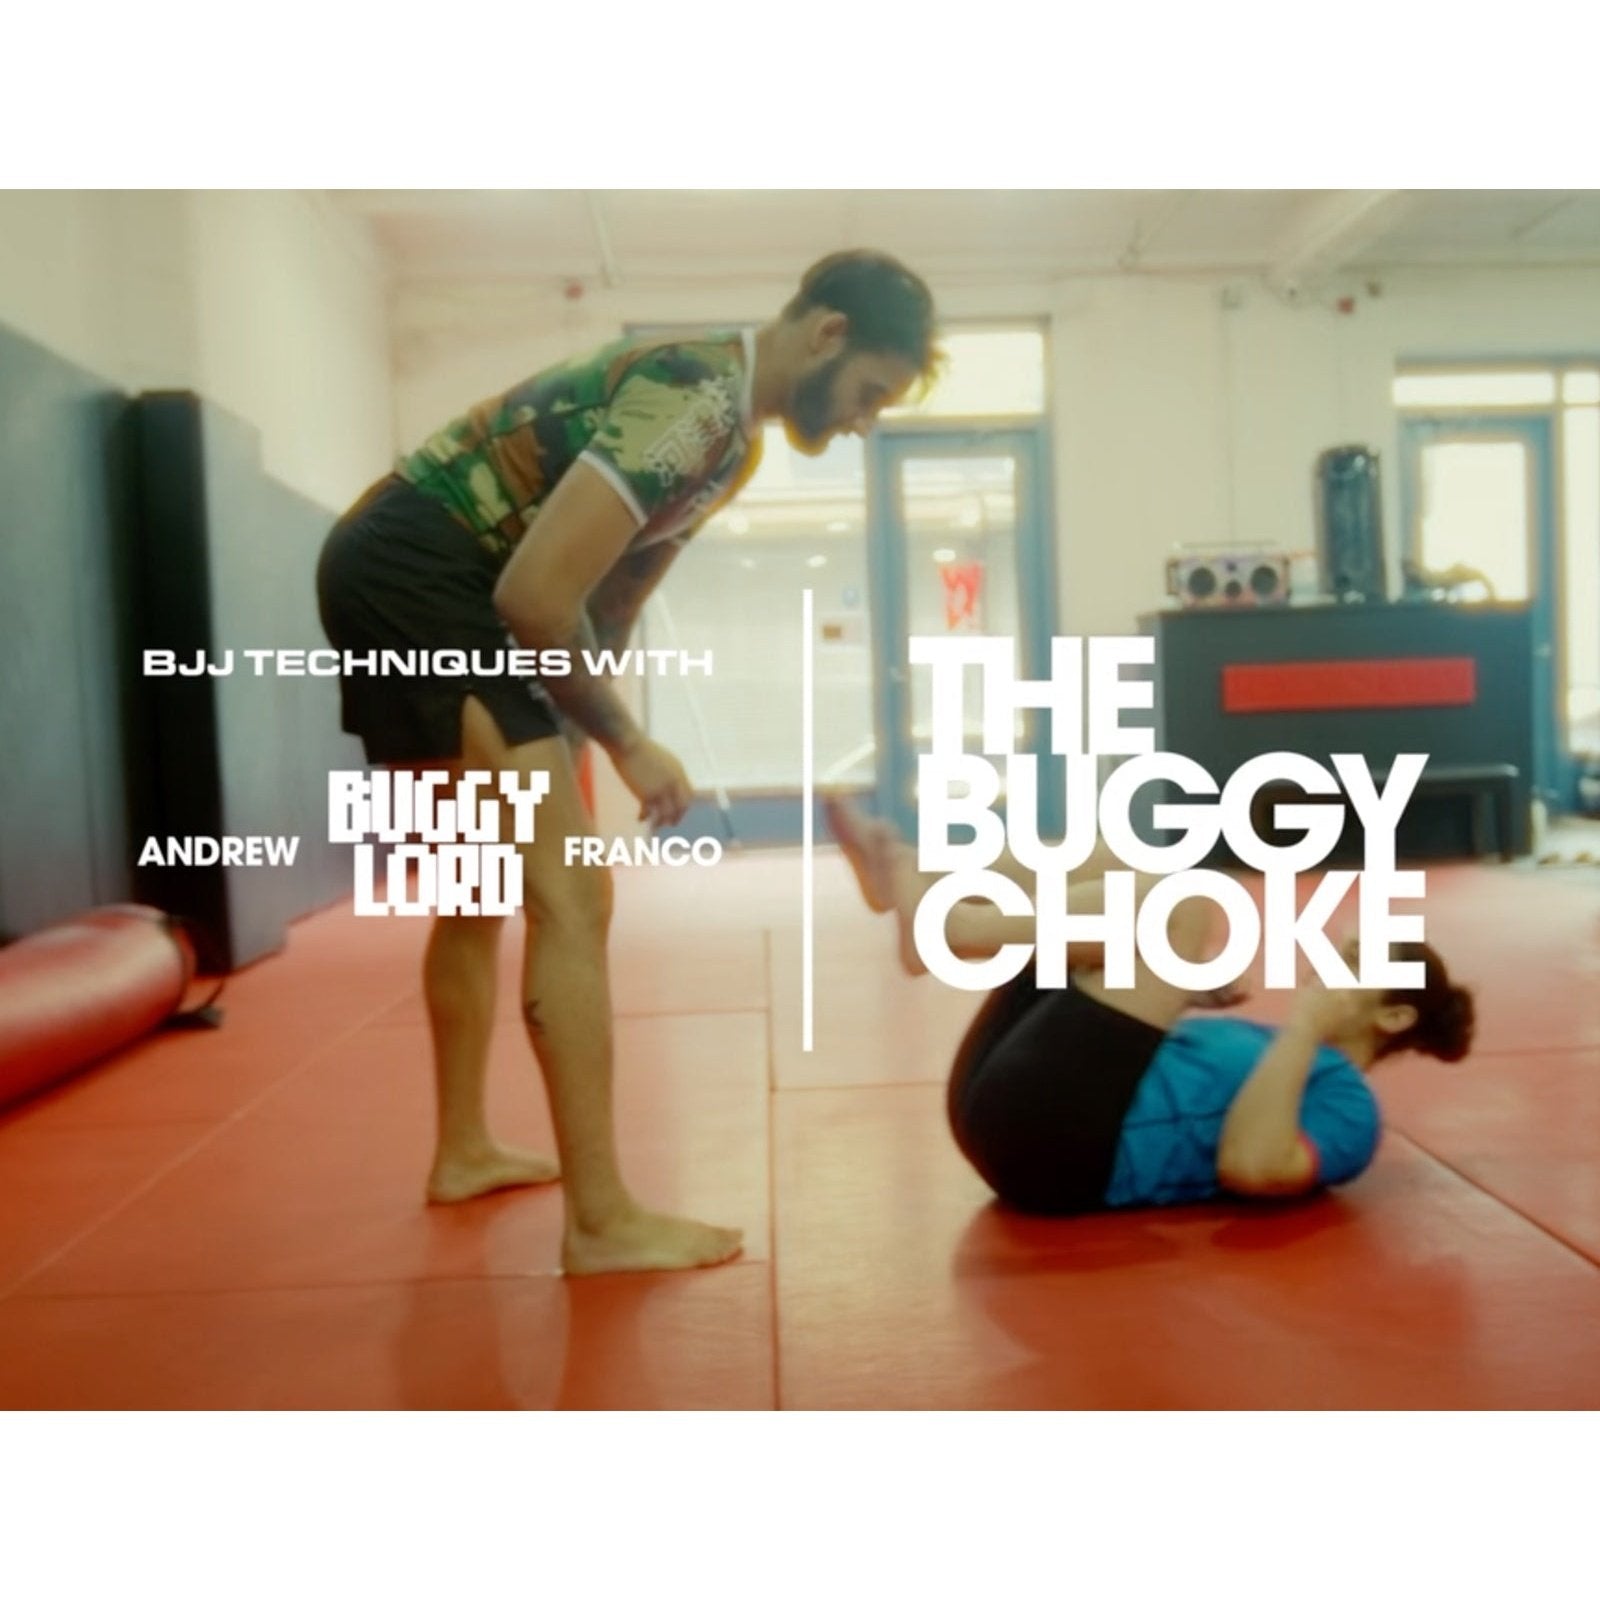 NOGI - Buggy Choke from top side control in 2 minutes!